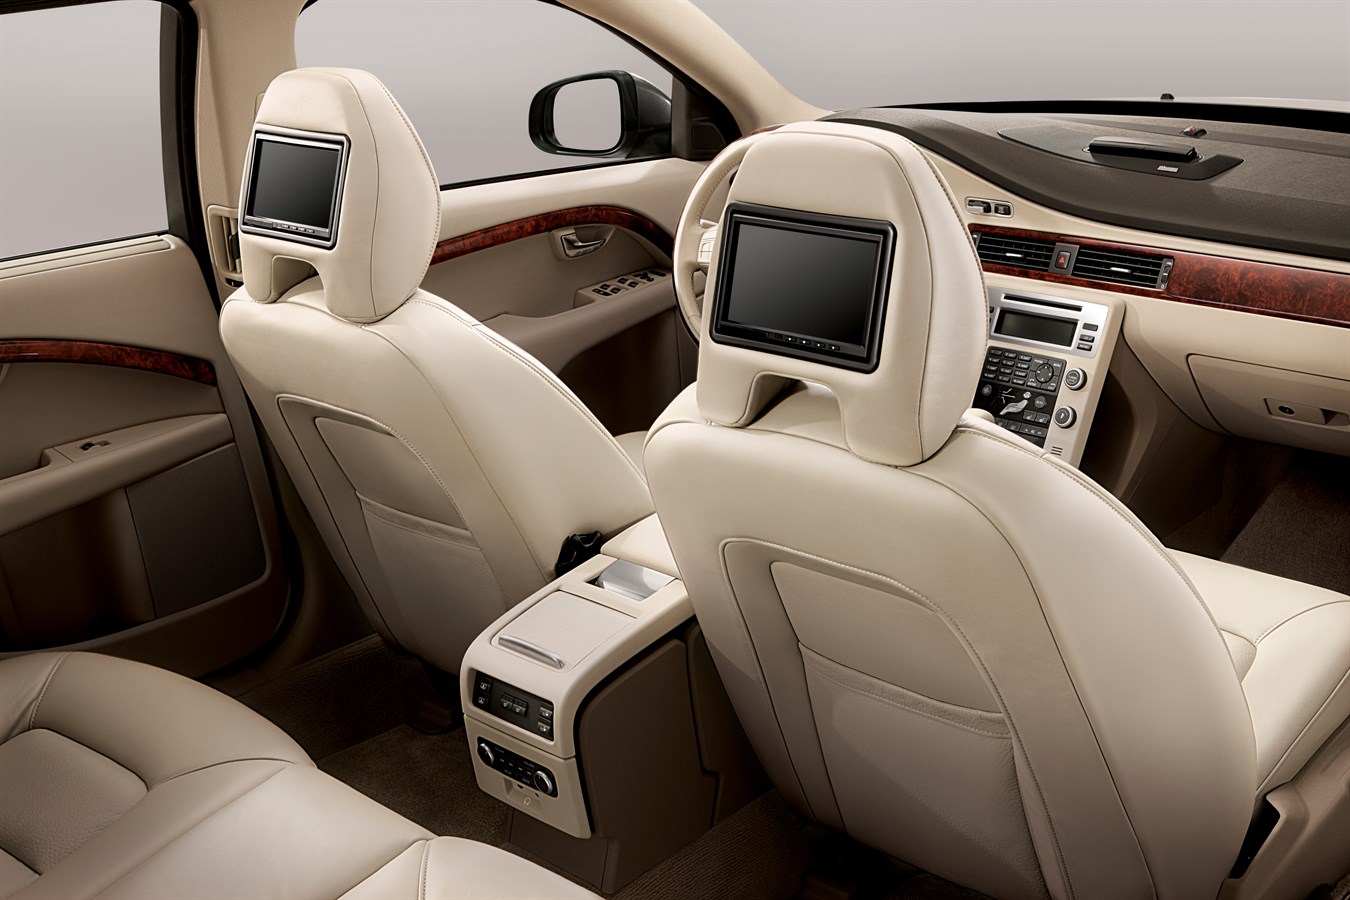 S80L - long wheel base - produced and marketed for the Chinese market. Interior.